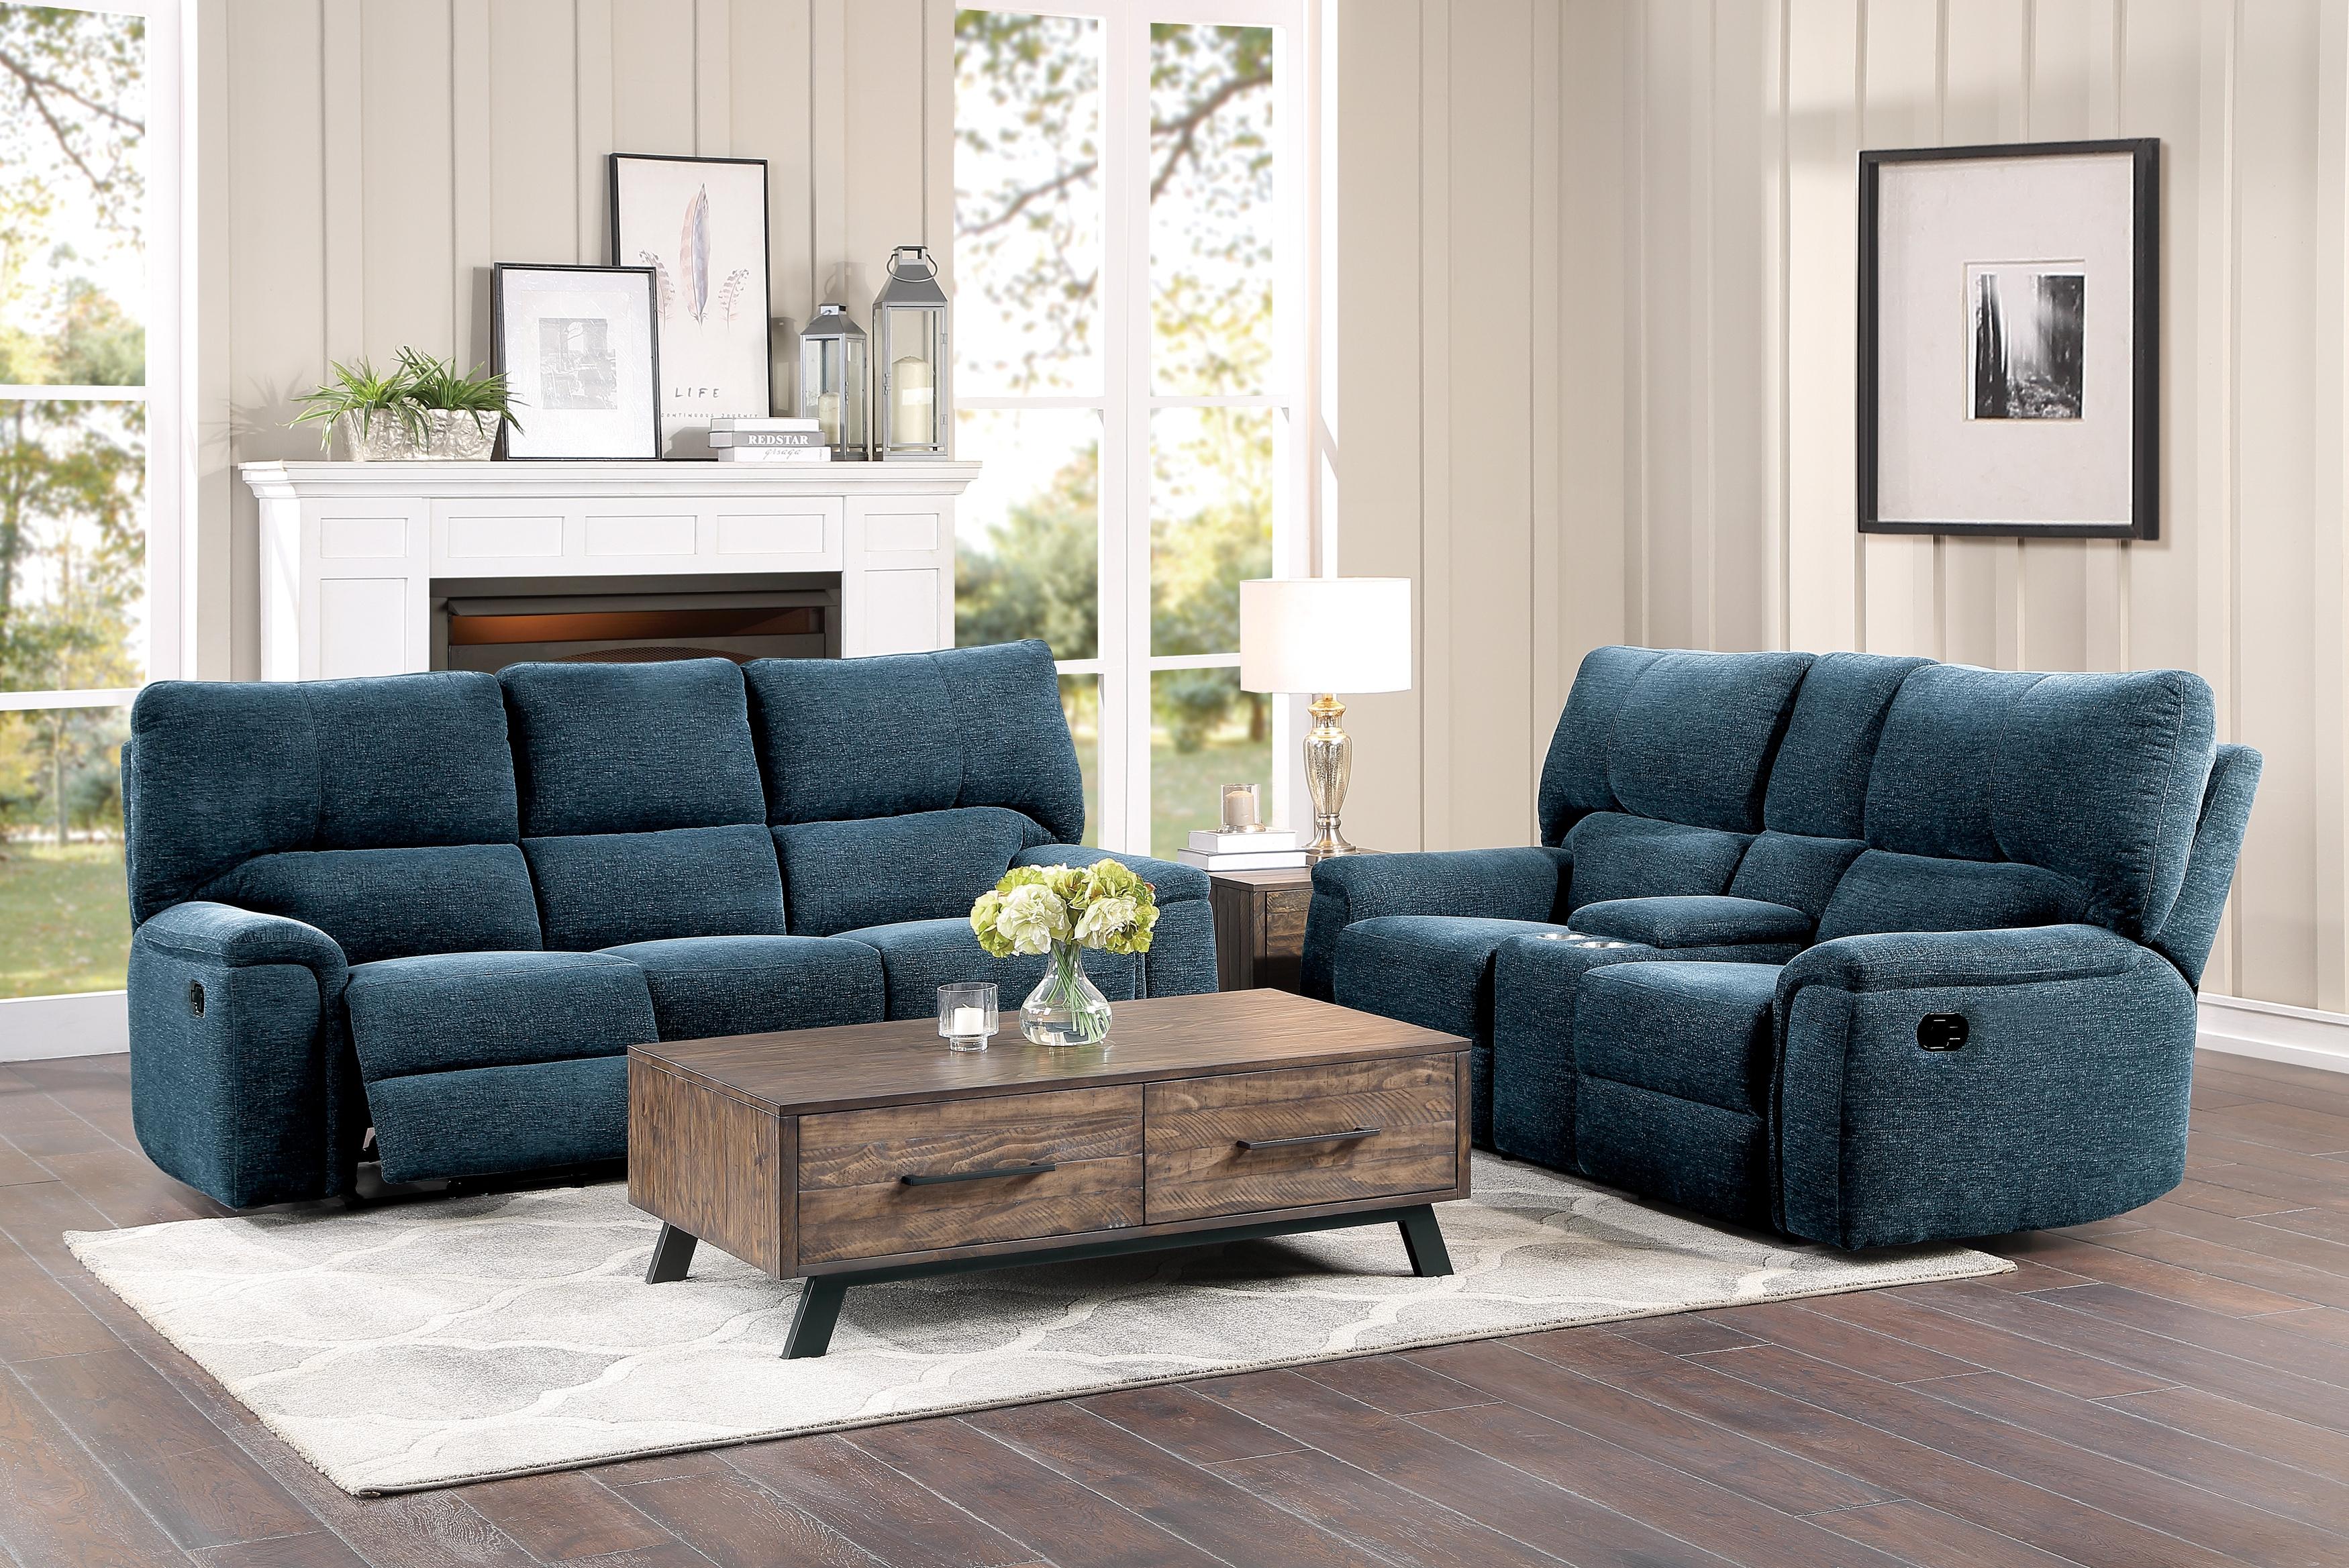 Transitional Reclining Sofa Set 9413IN-2PC Dickinson 9413IN-2PC in Indigo Chenille